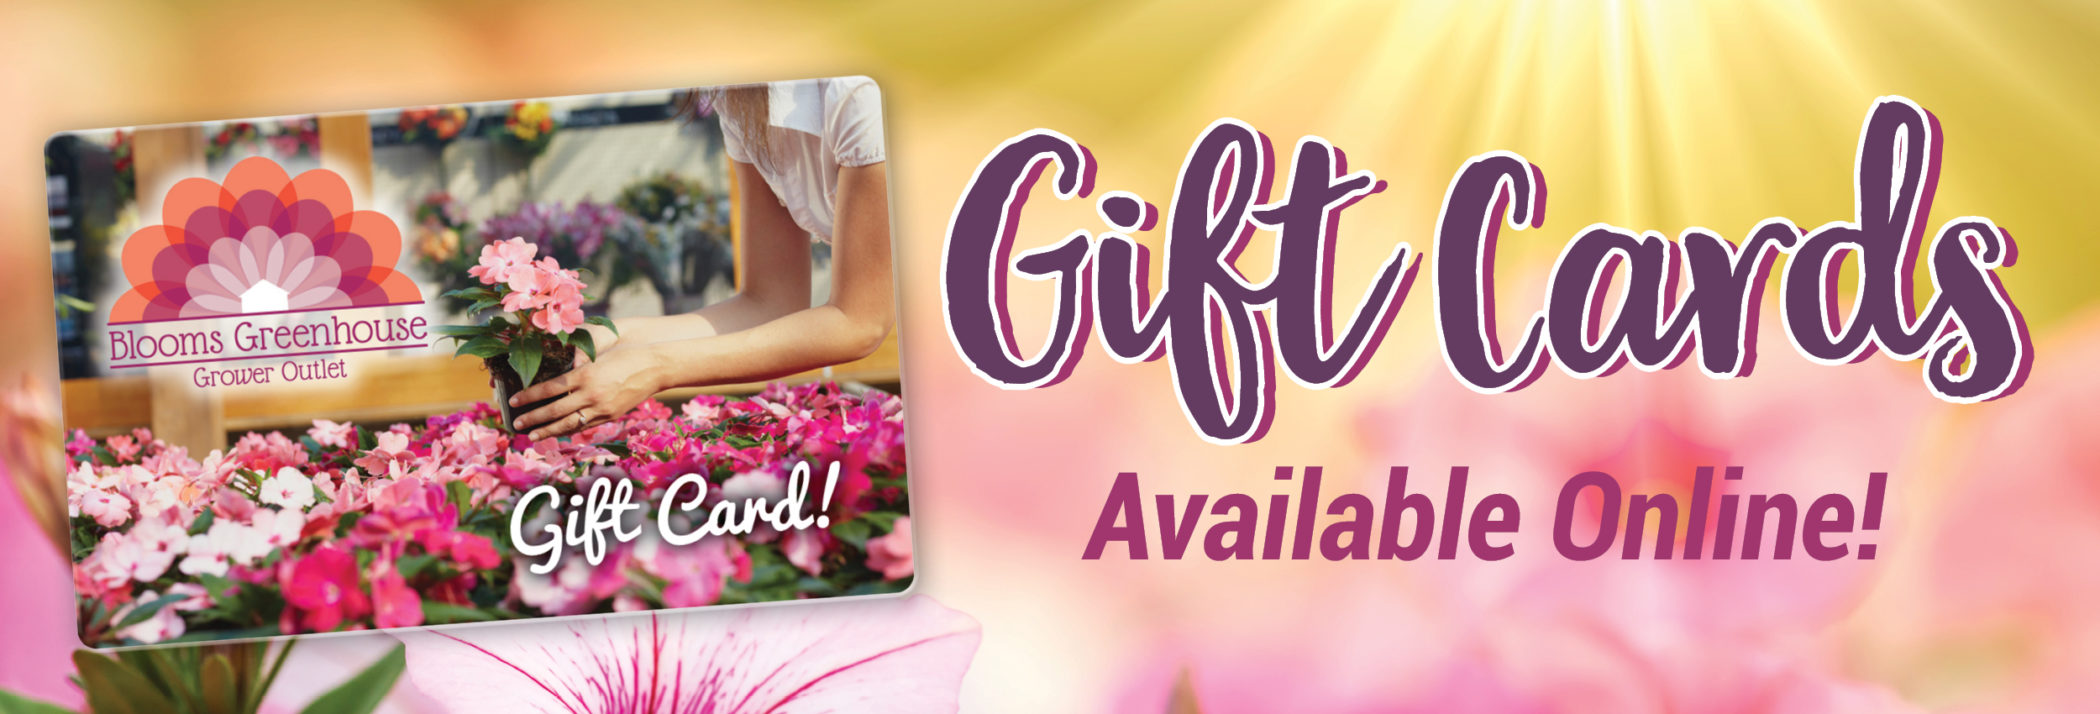 Gift Cards Available Online!